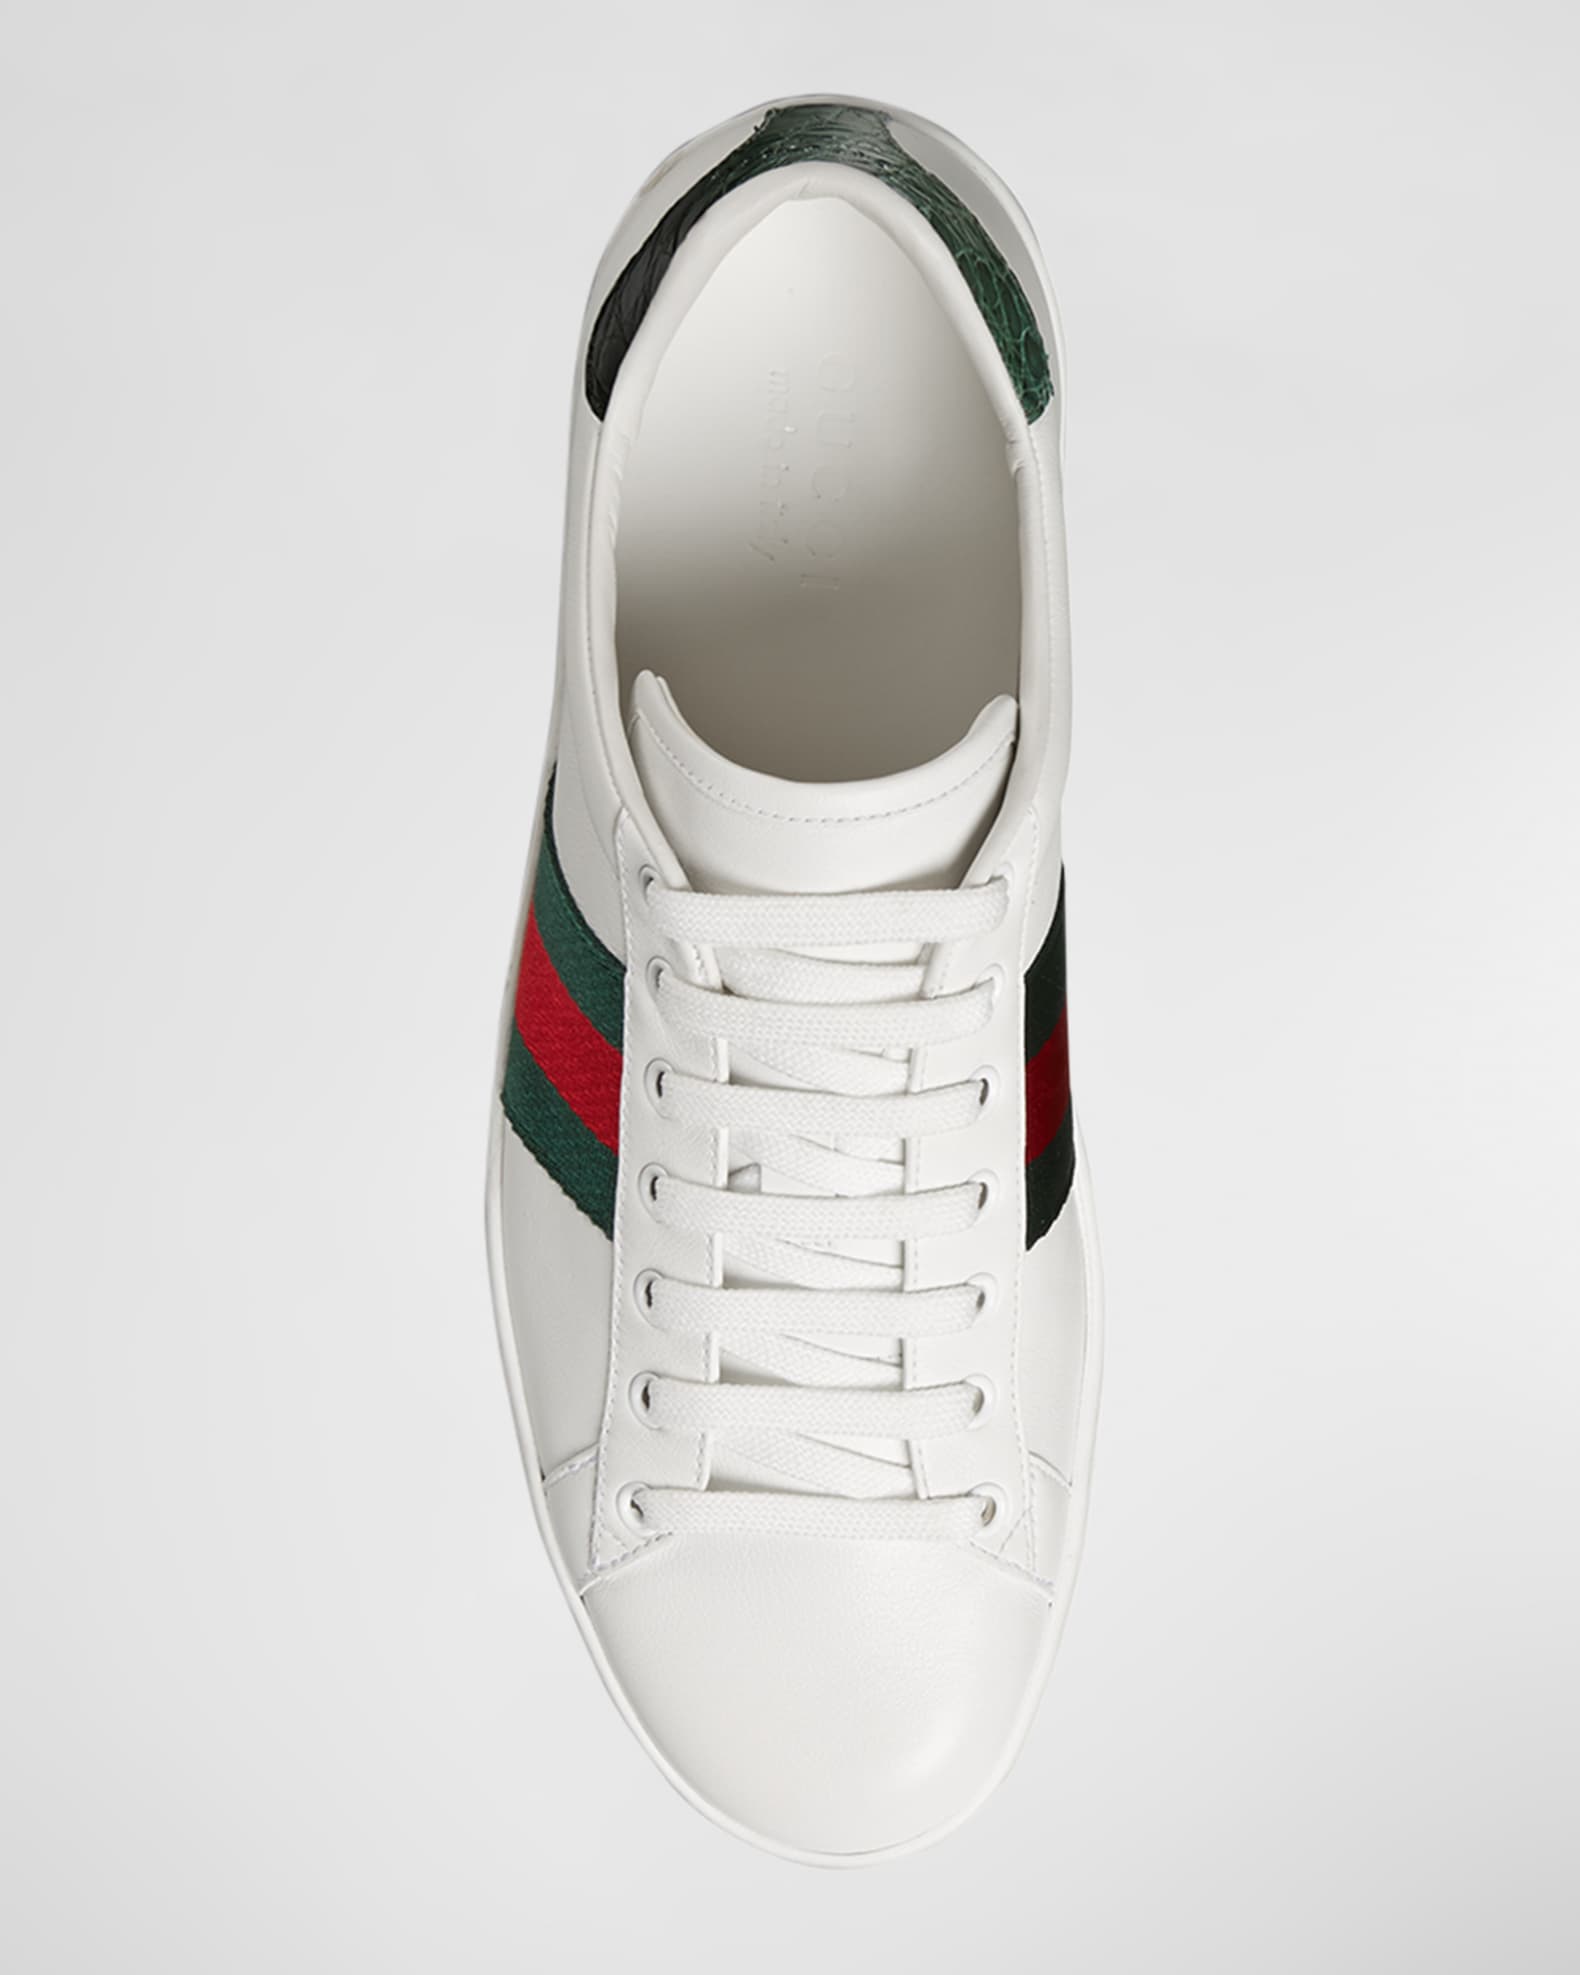 Gucci, Shoes, Mens Gucci Ace Leather Sneaker